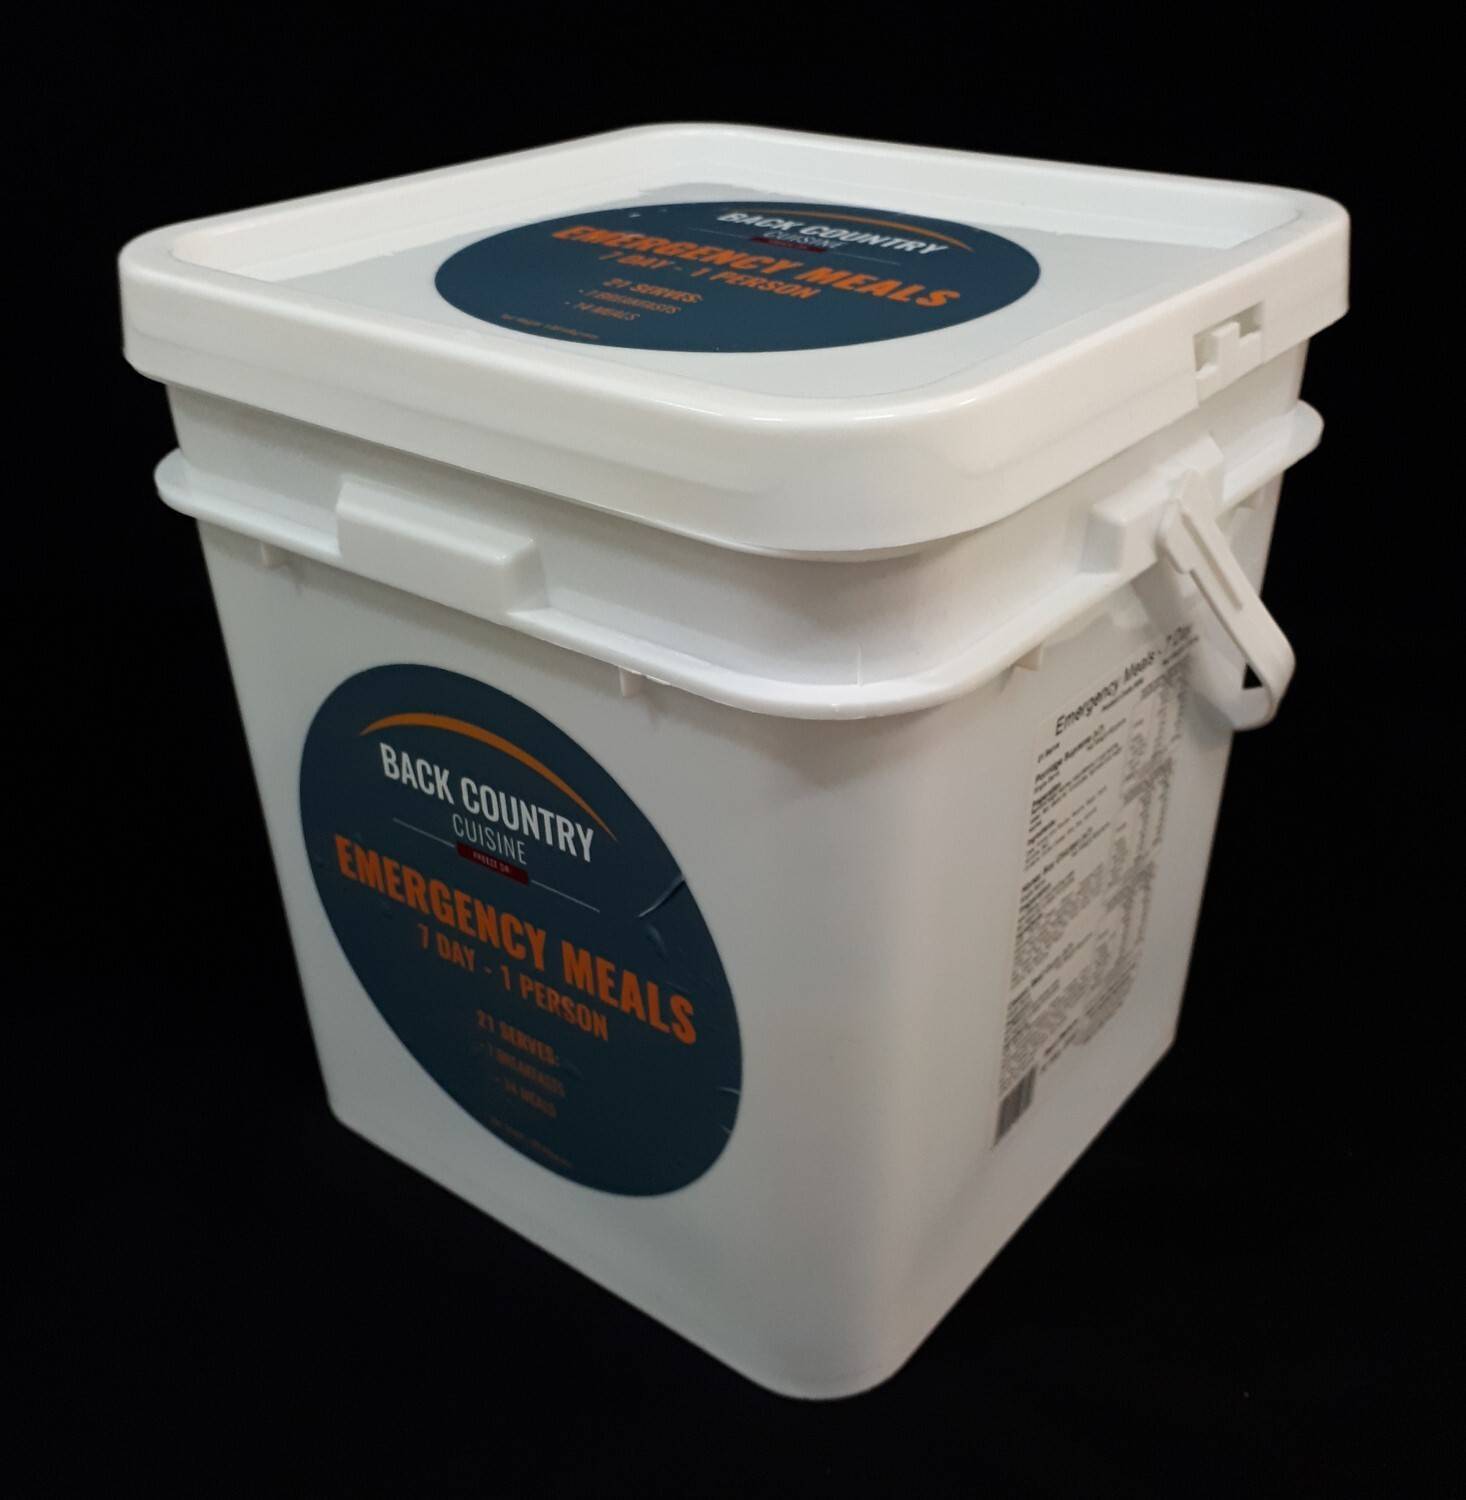 Back Country Cuisine 7 Day Emergency Meal Bucket 1 Person - Tramping Food and Accessories sold by Venture Outdoors NZ